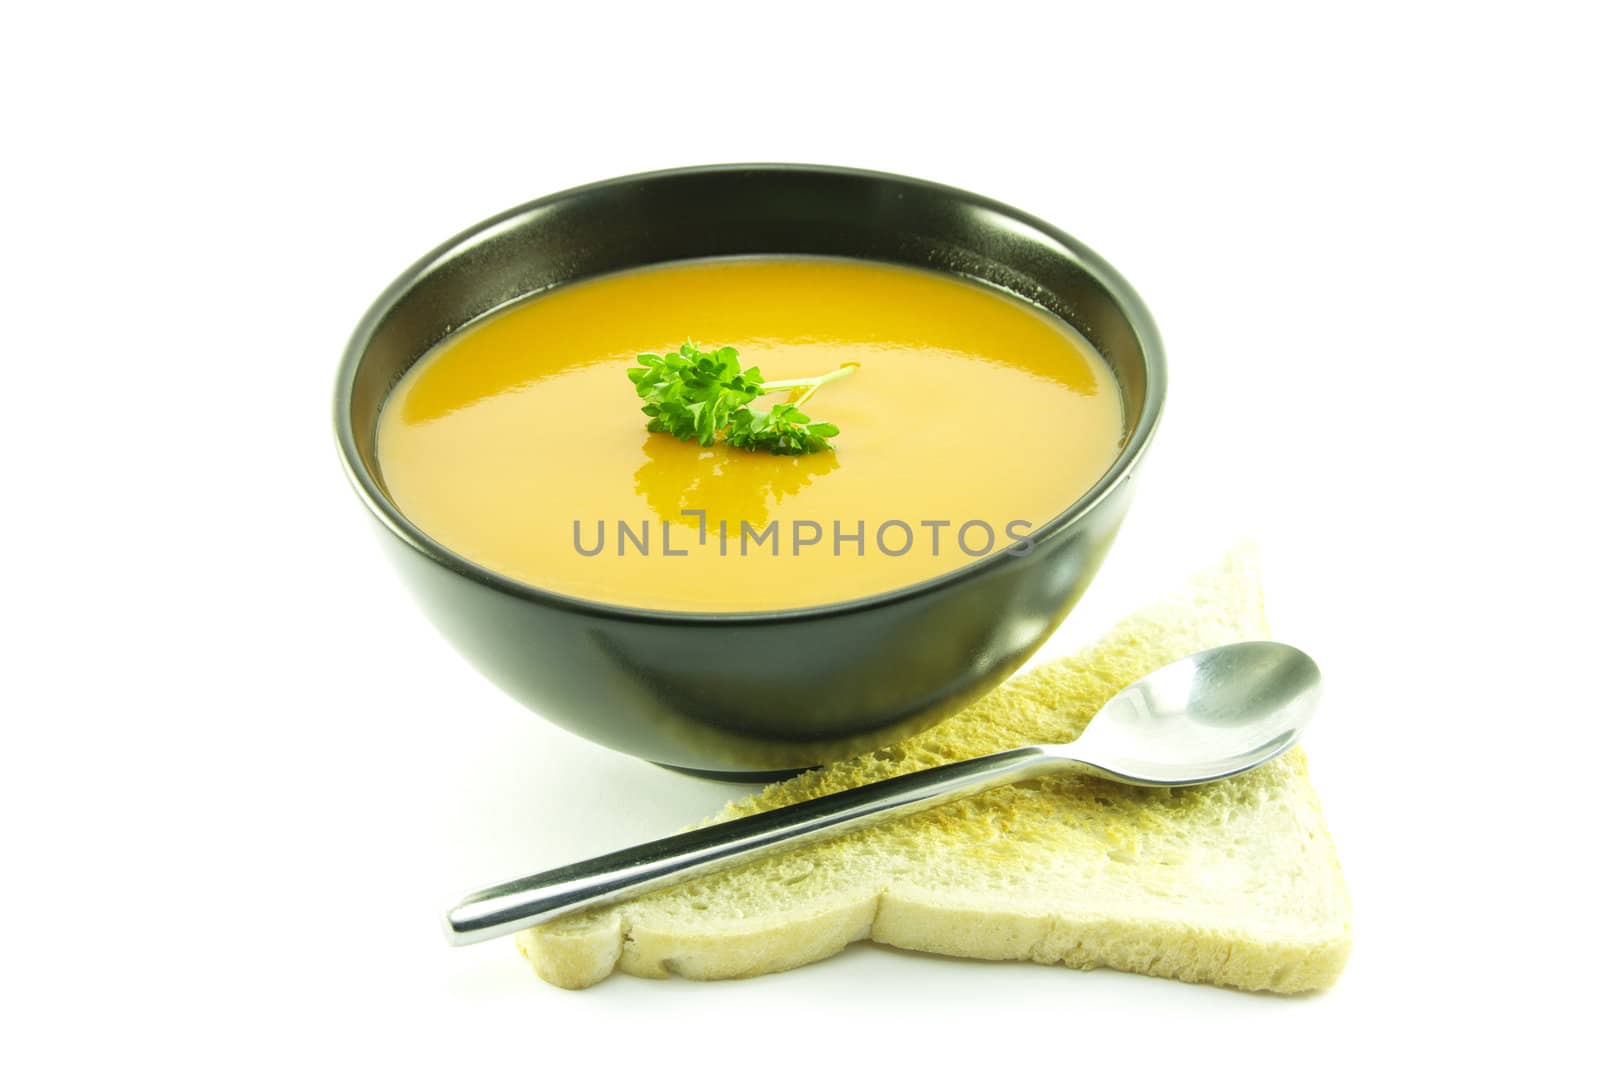 Rich red deliicious tomato soup in a small round black bowl with a sprig of parsley, toast and a spoon on a white background